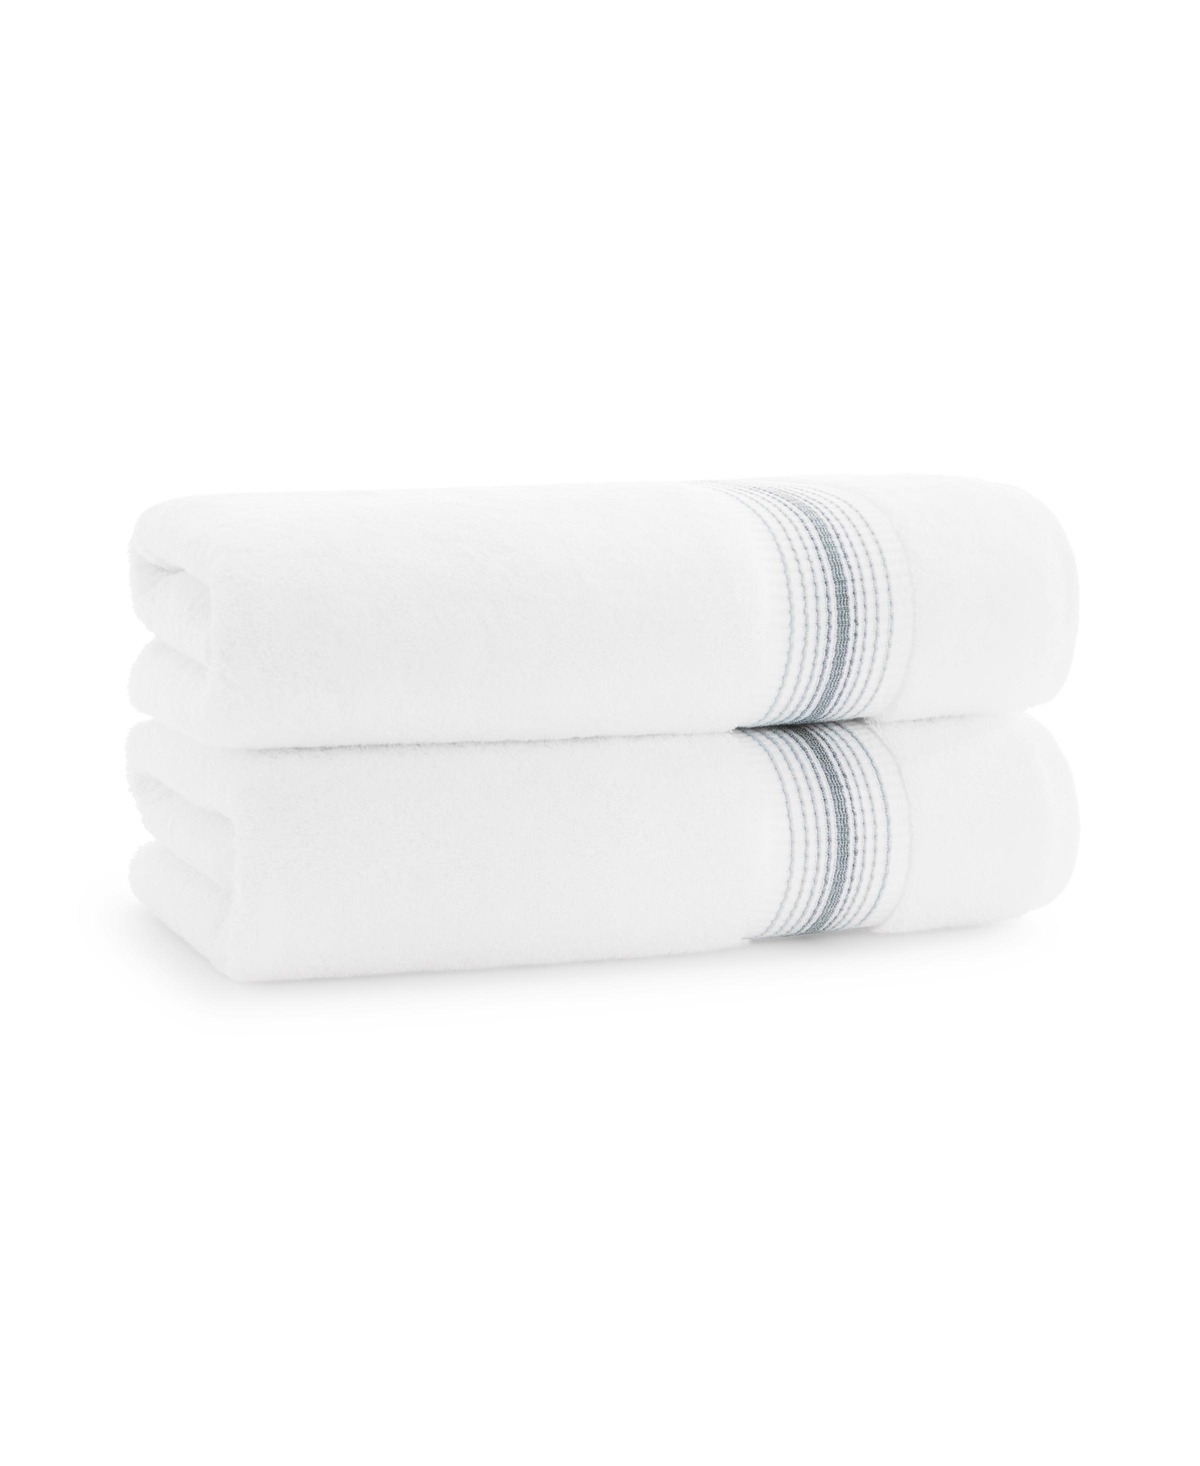 Aston And Arden White Turkish Luxury Striped Towels With For Bathroom 600 Gsm, 30x60 In., 2-pack , S In Slate